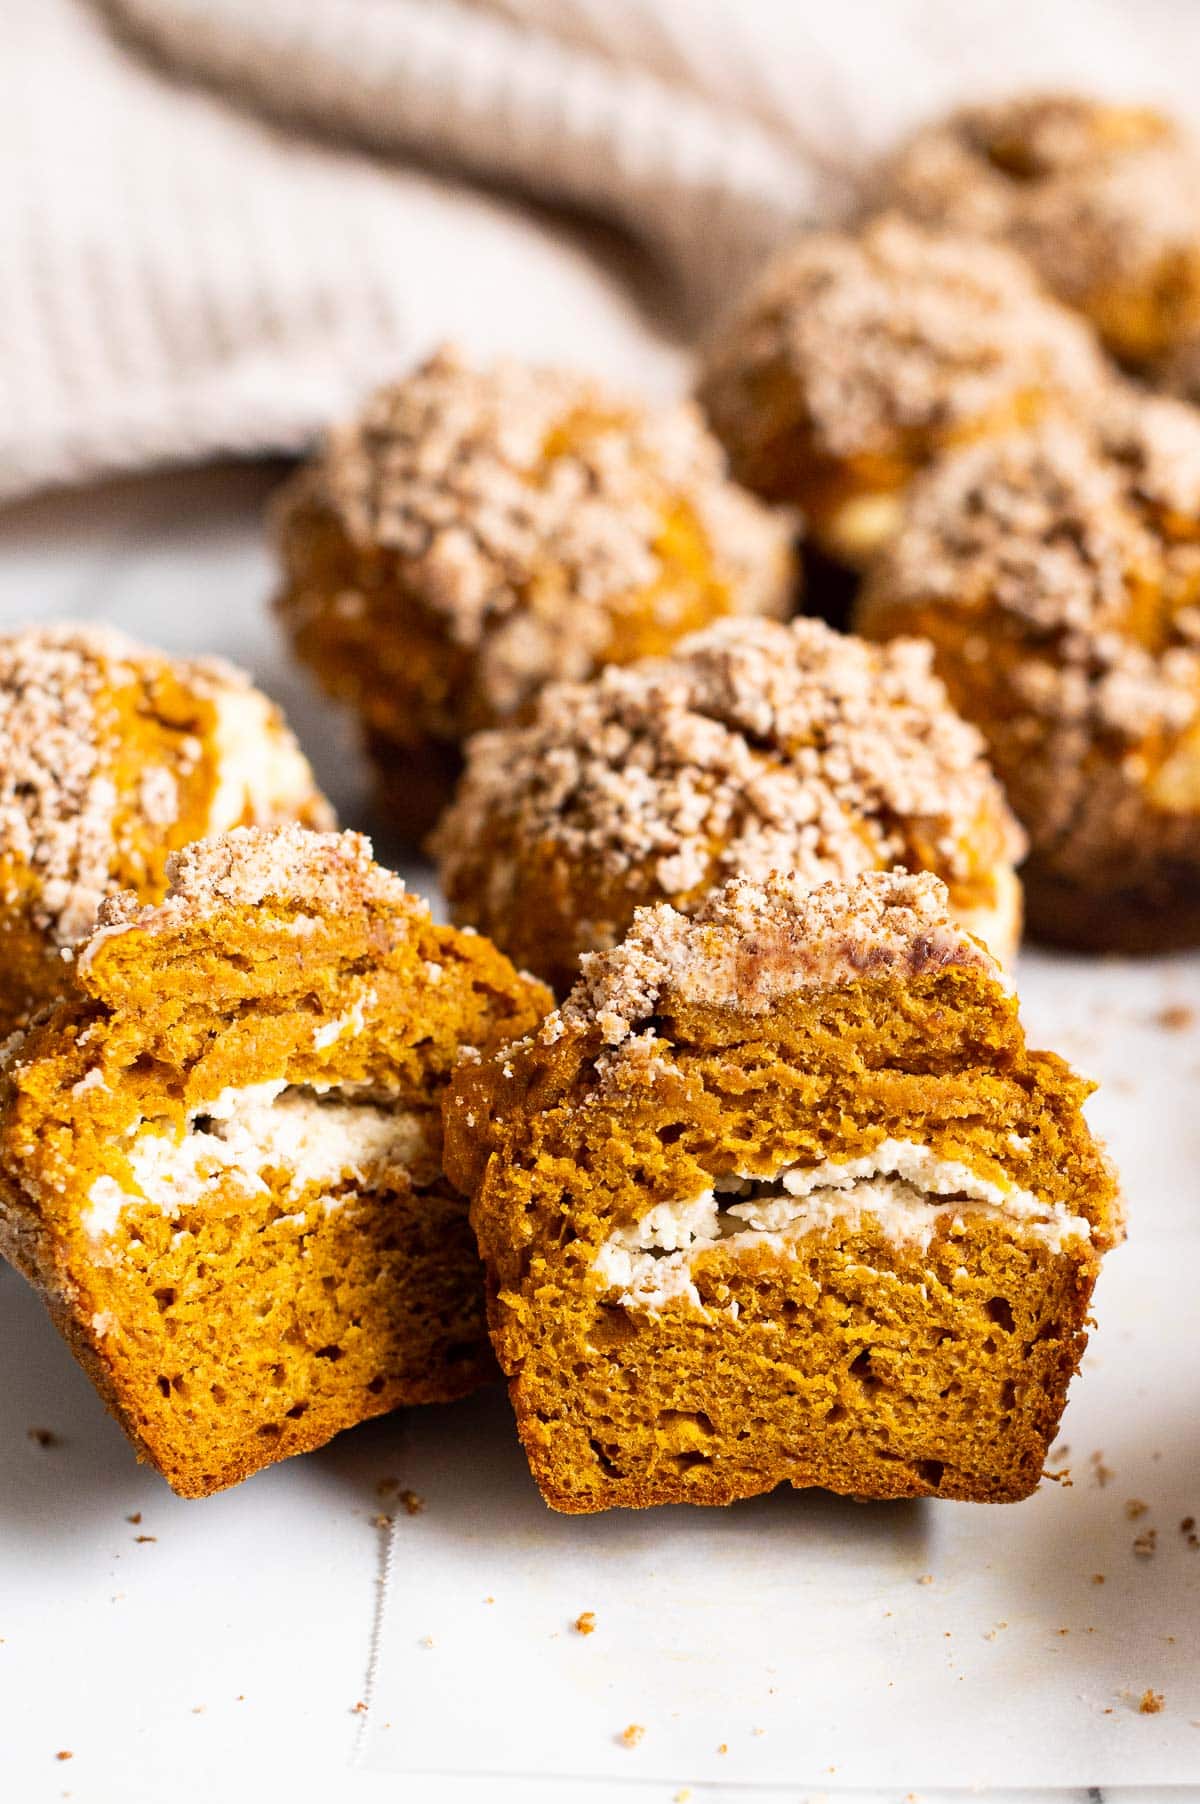 Pumpkin cream cheese muffin sliced in half showing texture and filling inside.